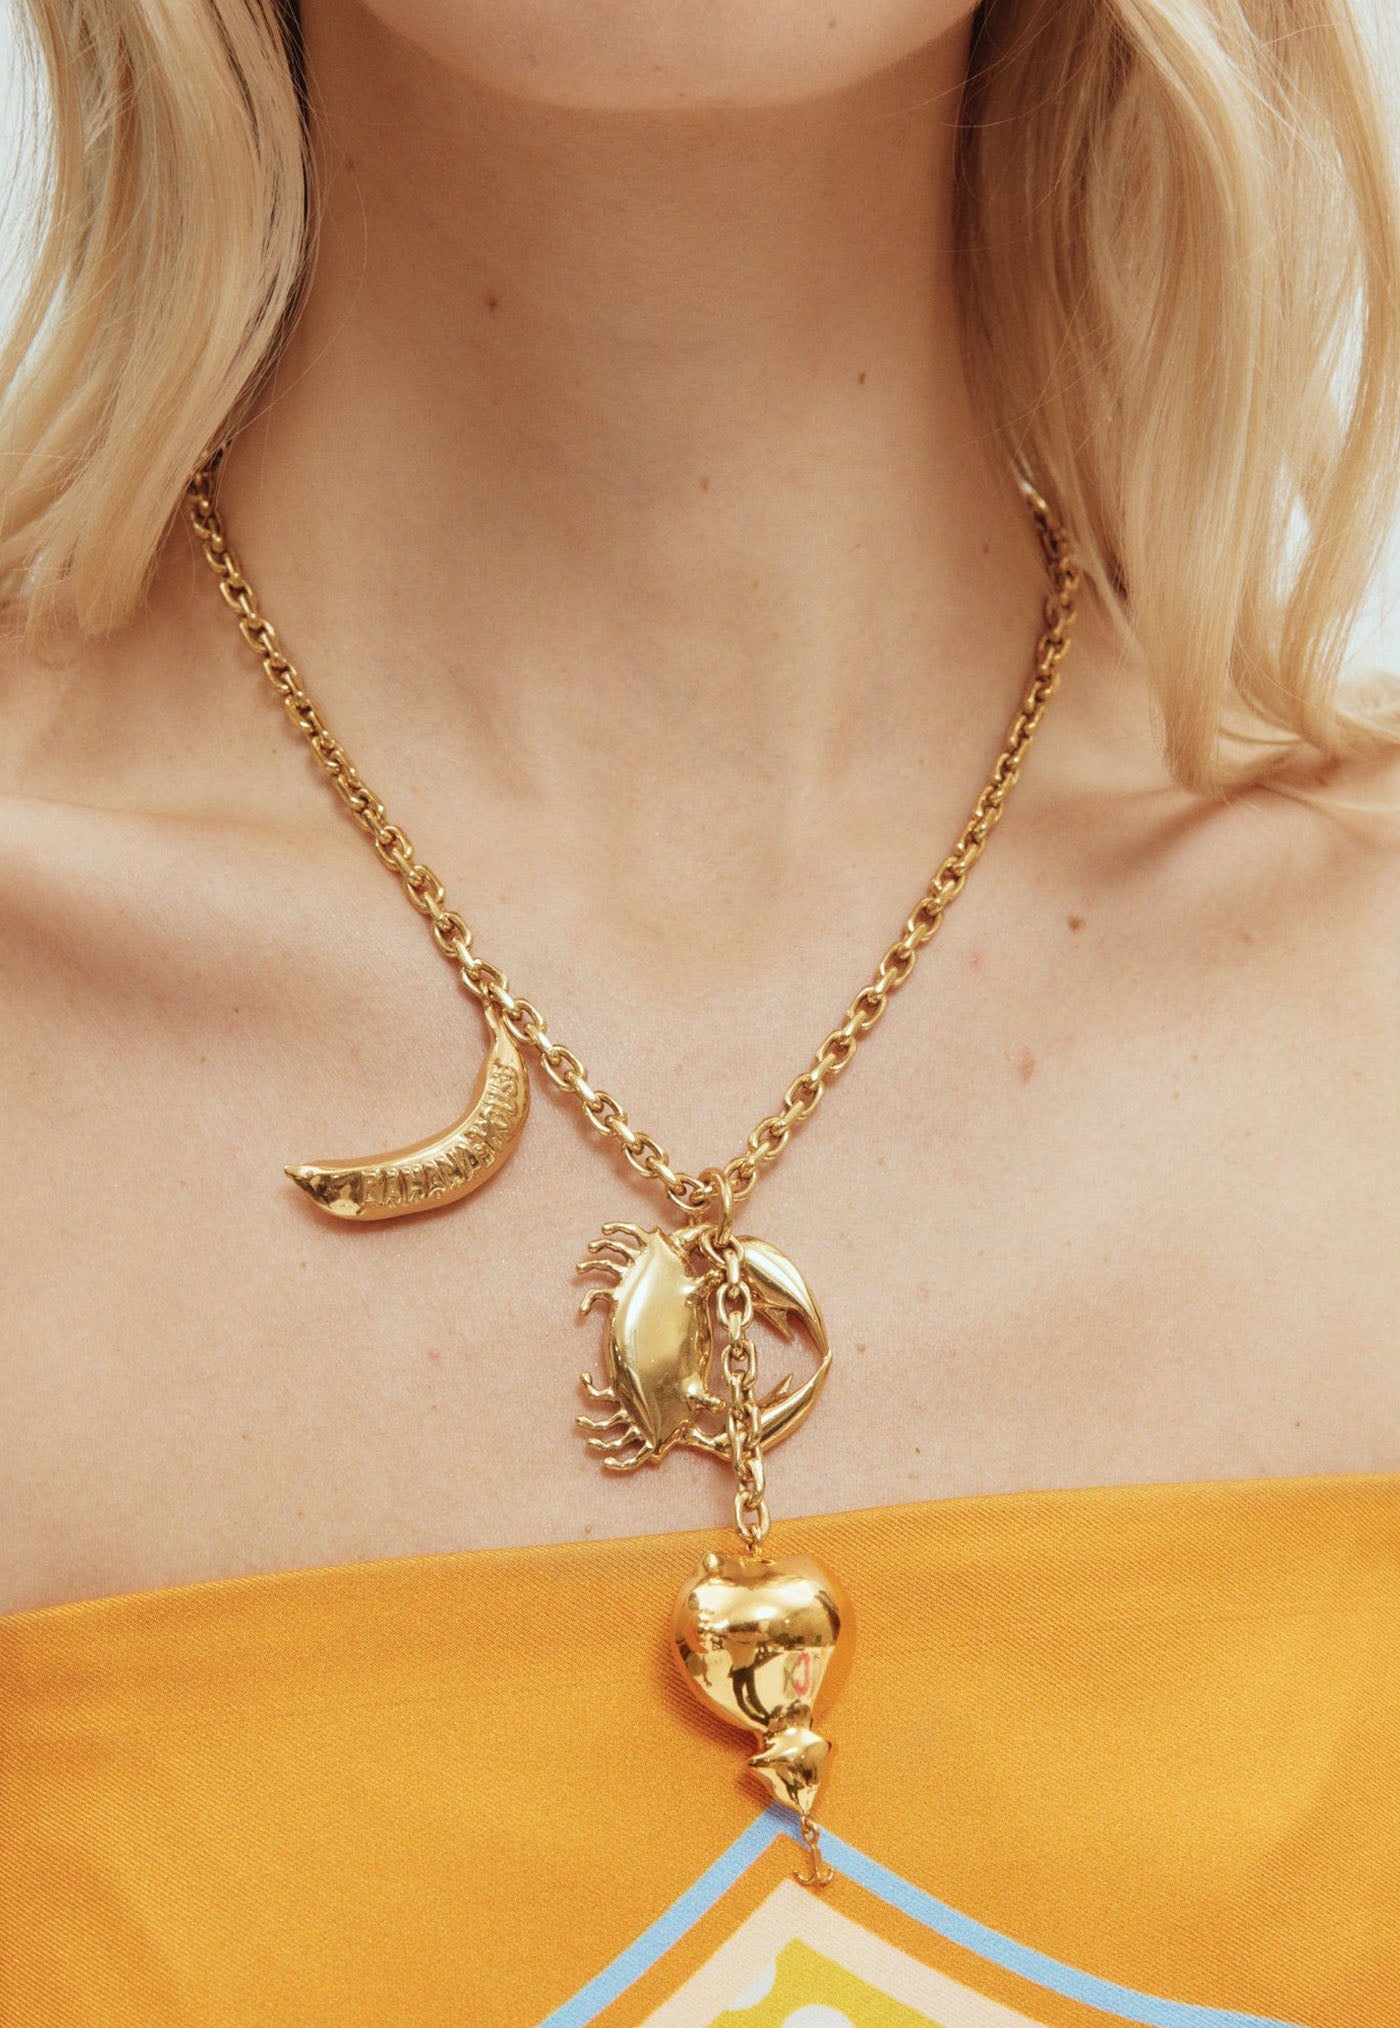 Banana House Charm Necklace - Gold sold by Angel Divine